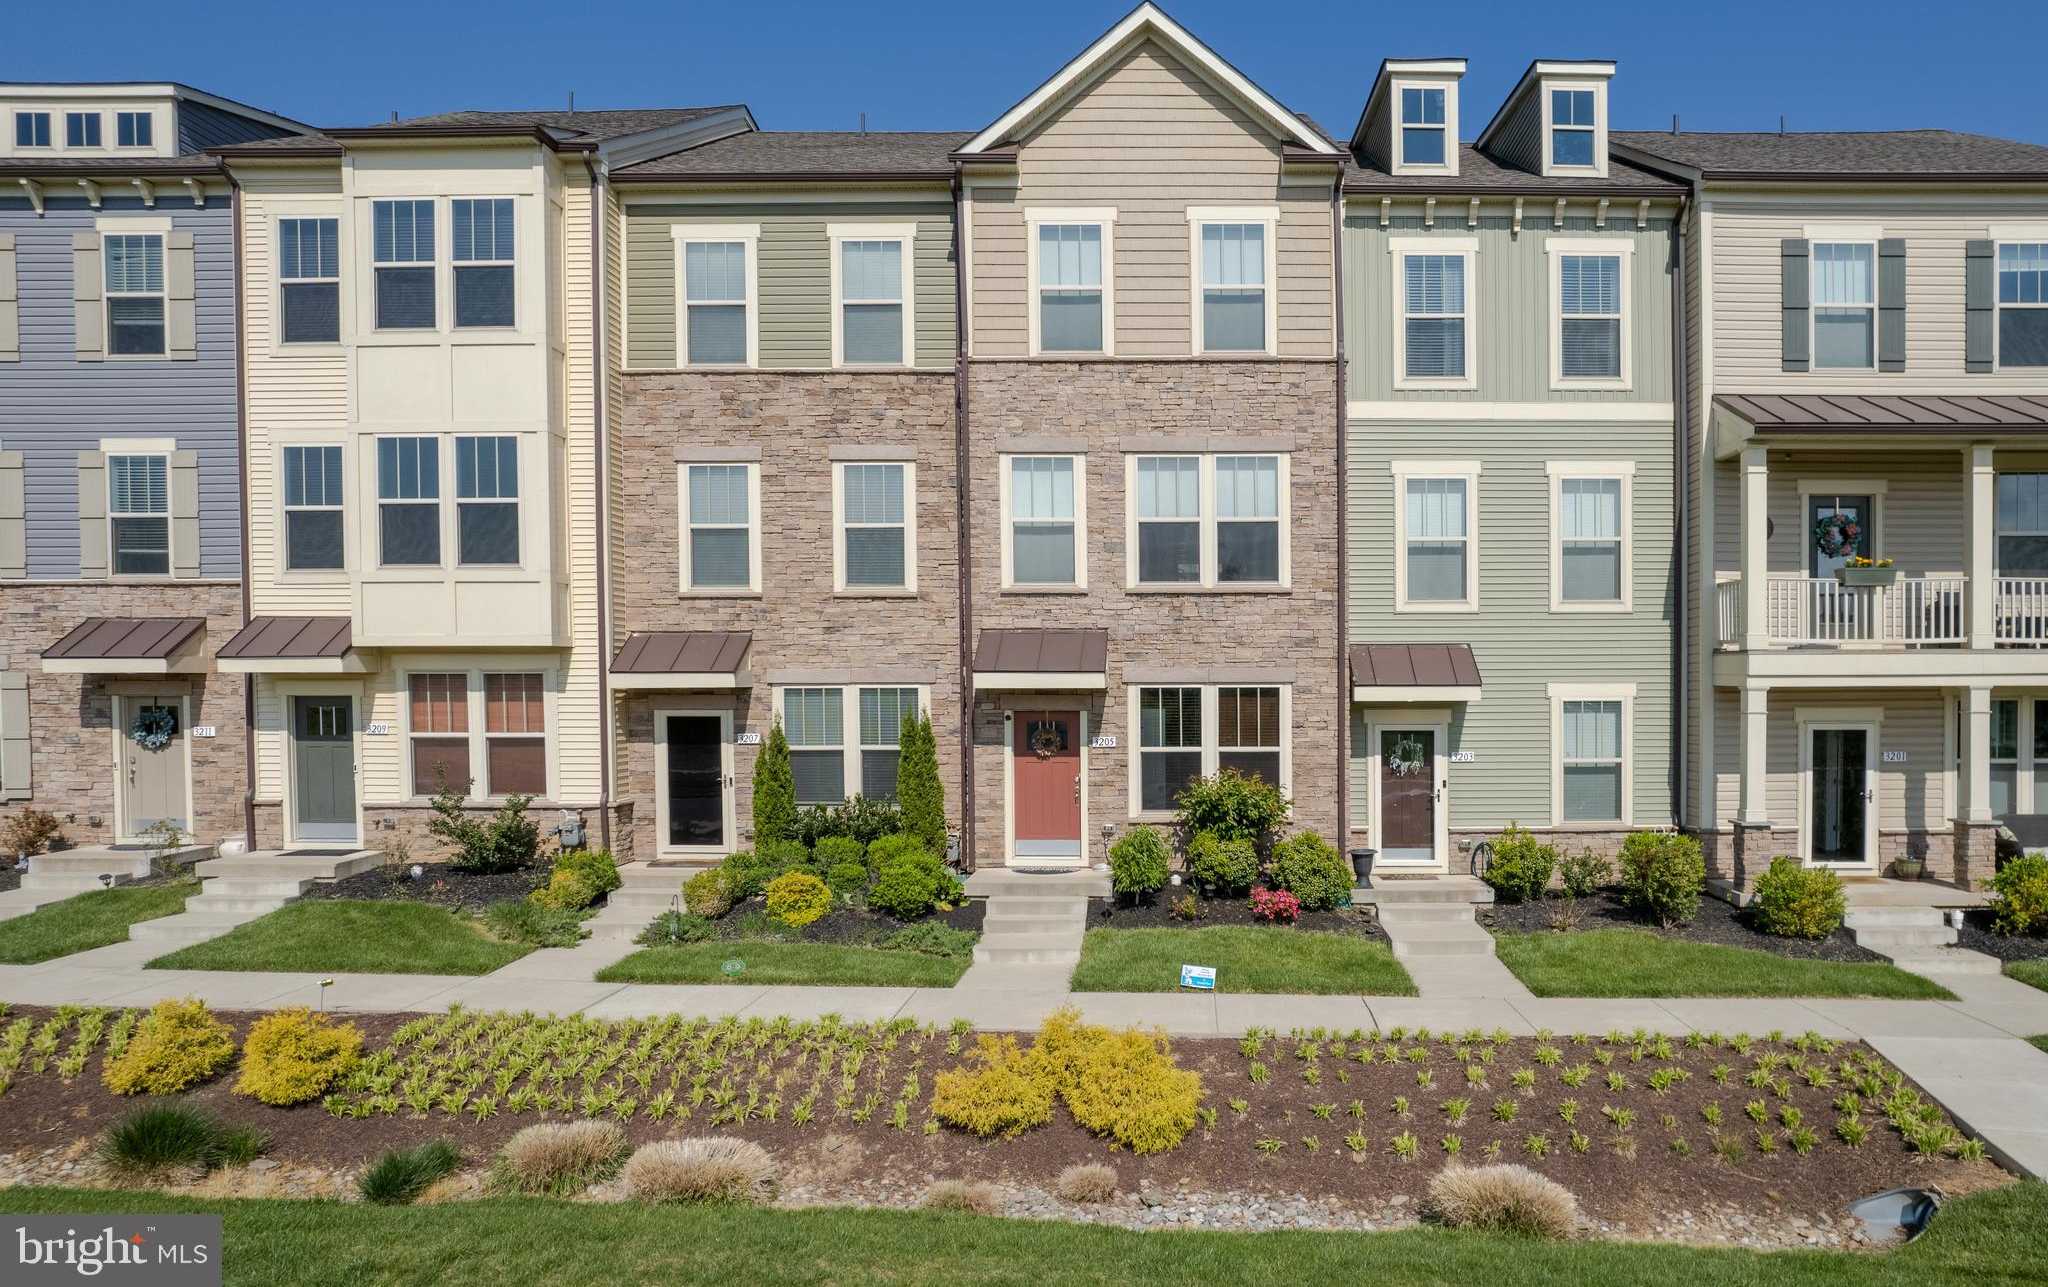 View FREDERICK, MD 21704 townhome